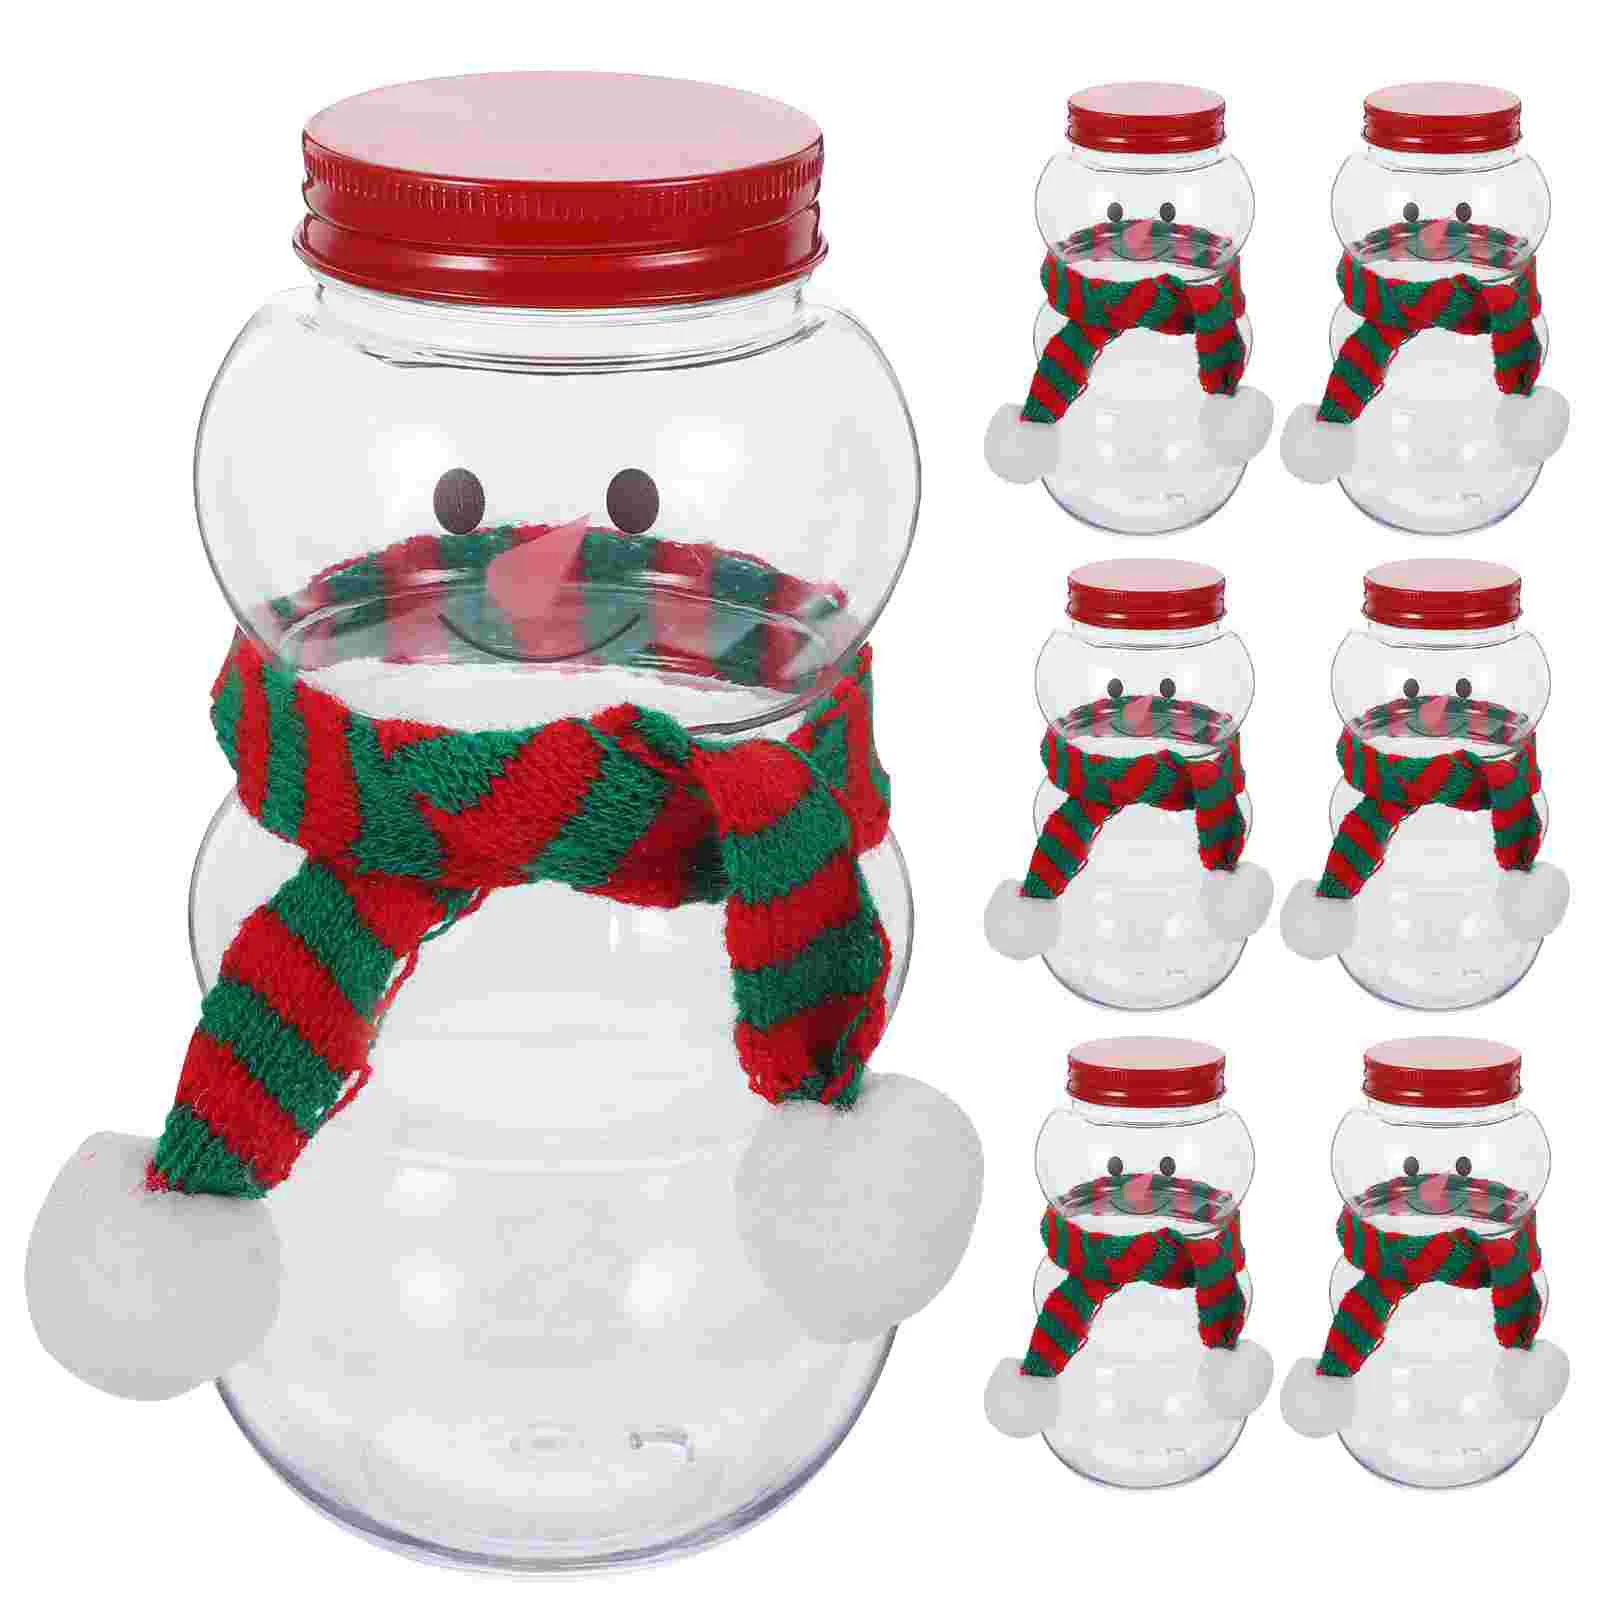 

10 Sets Drink Cup Water Empty Bottles Milk Wrapping Juice Lids Cover Portable Candy Jars Snowman The Pet Beverage